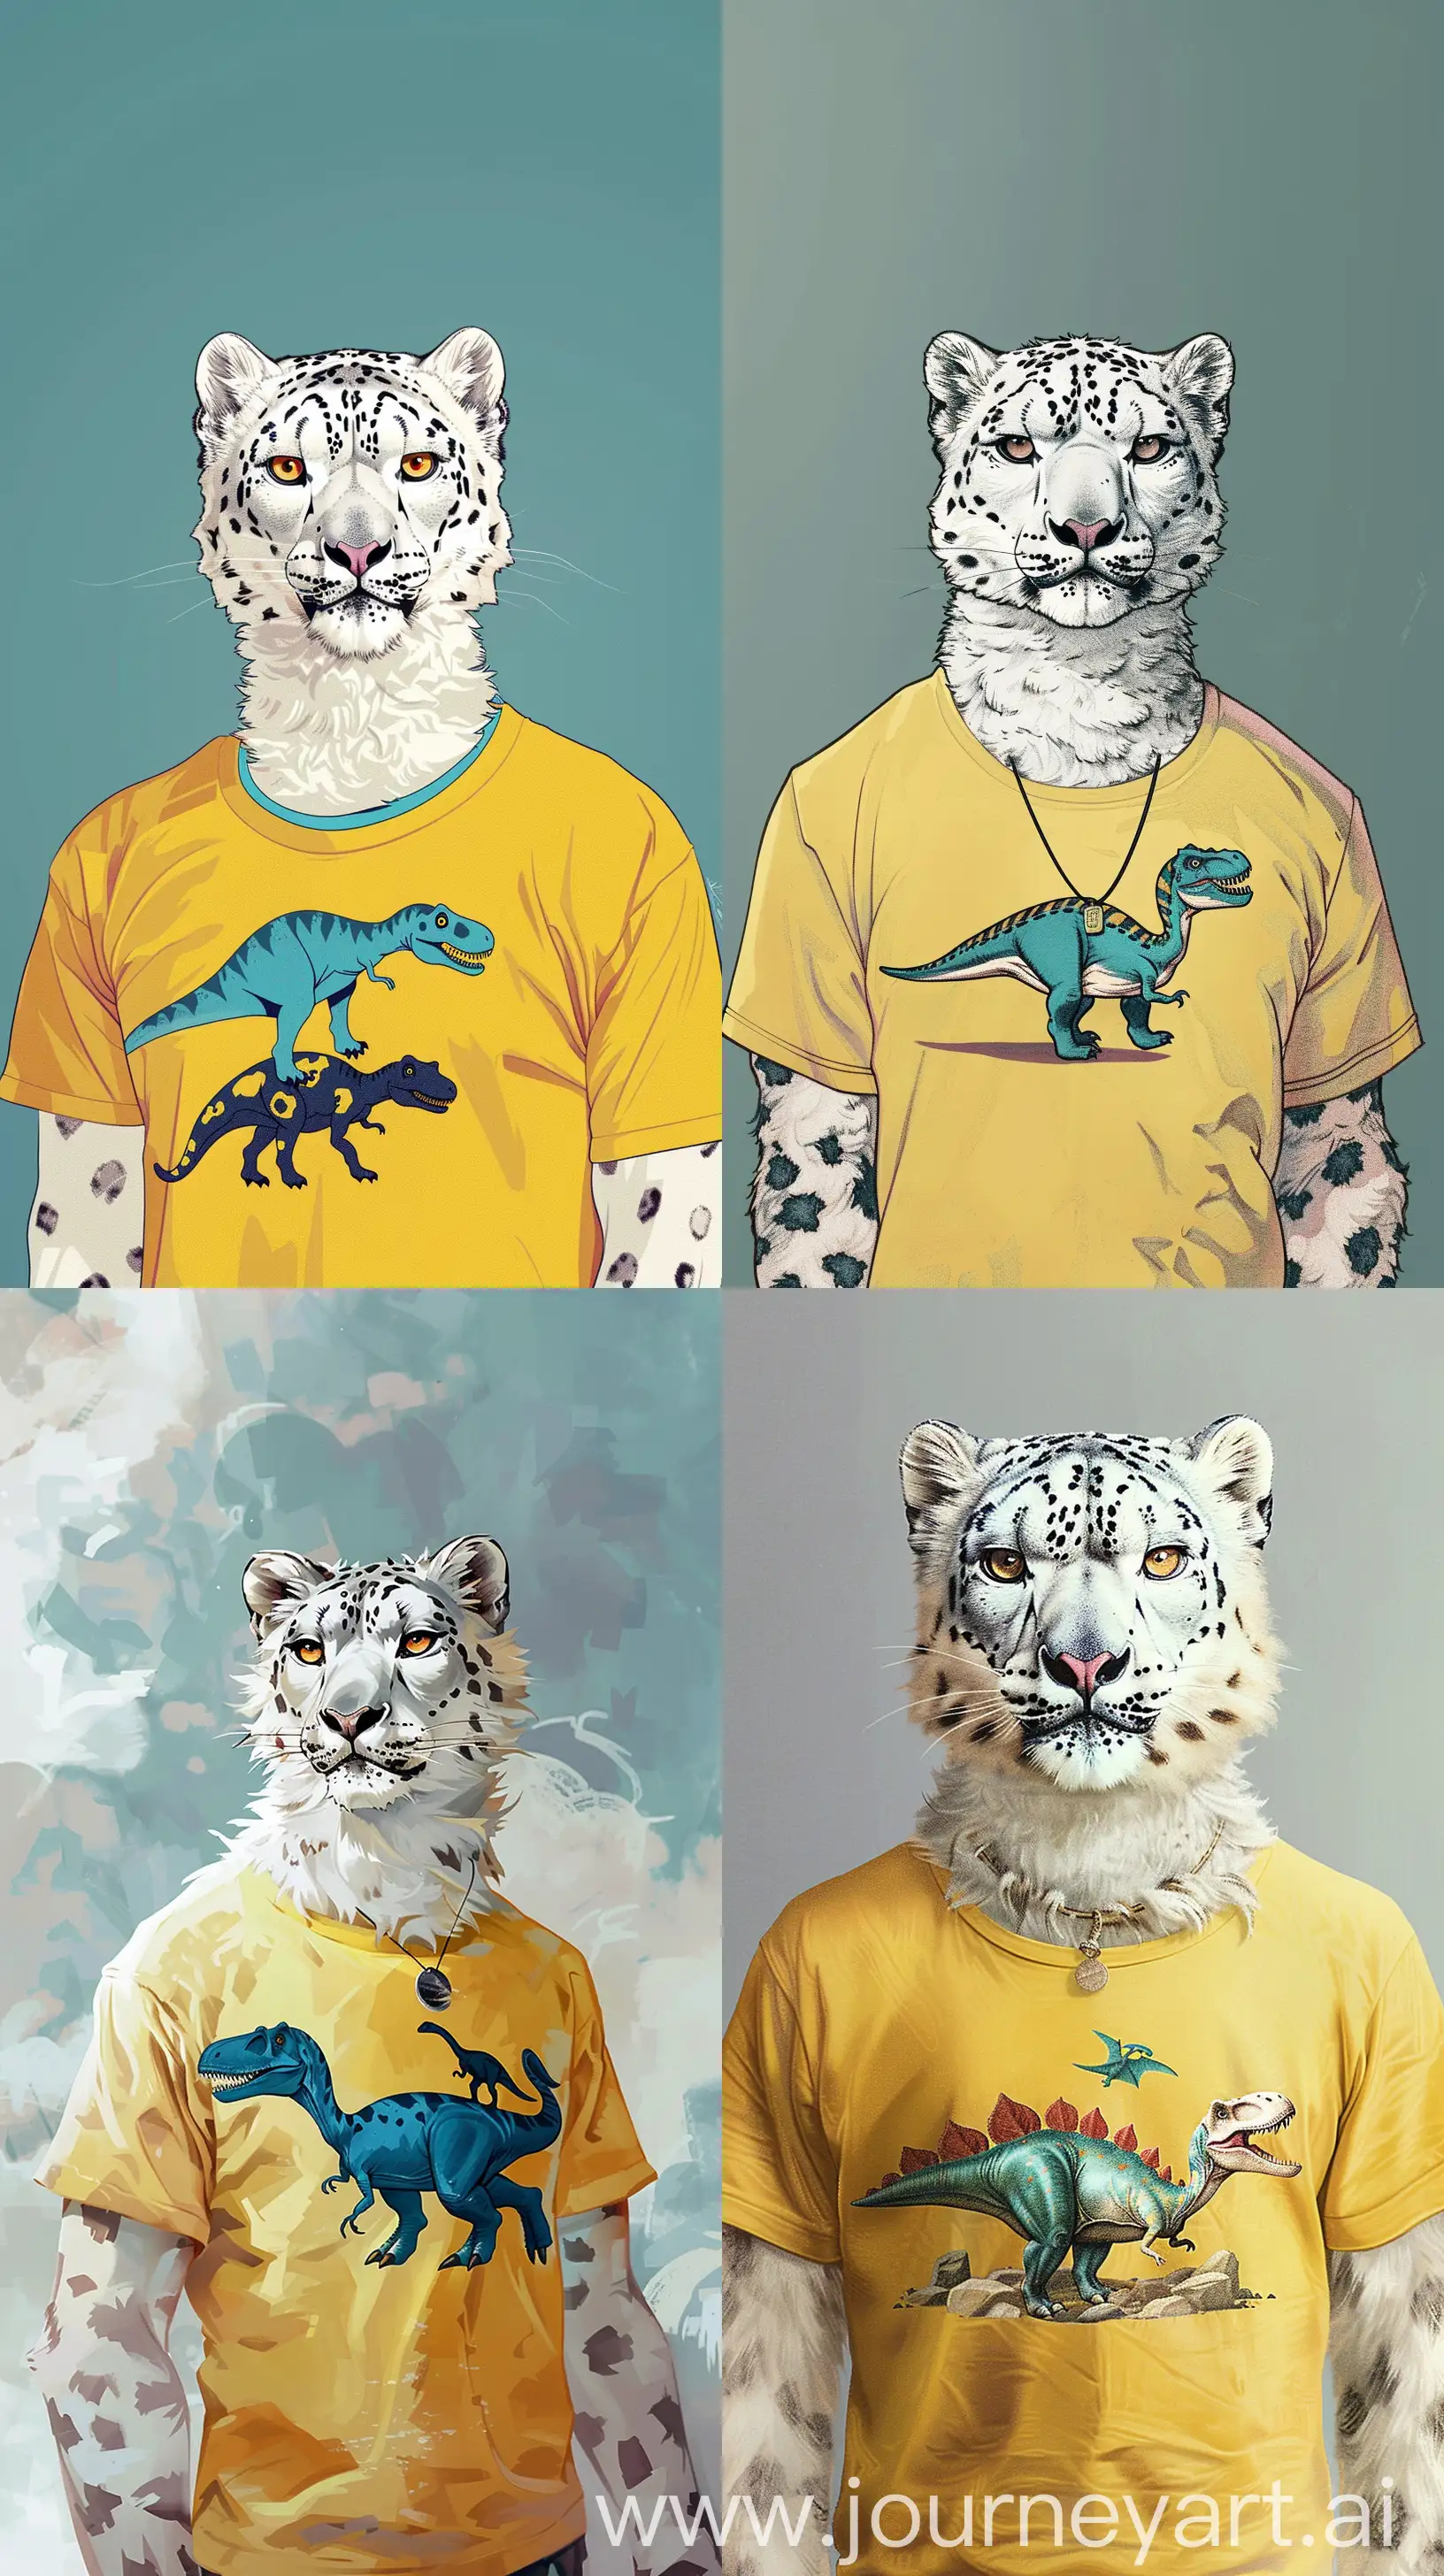 Snow-Leopard-Anthropomorphized-in-Kees-van-Dongen-Art-Style-Man-in-White-Body-with-Dinosaur-Tshirt-Phone-Wallpaper